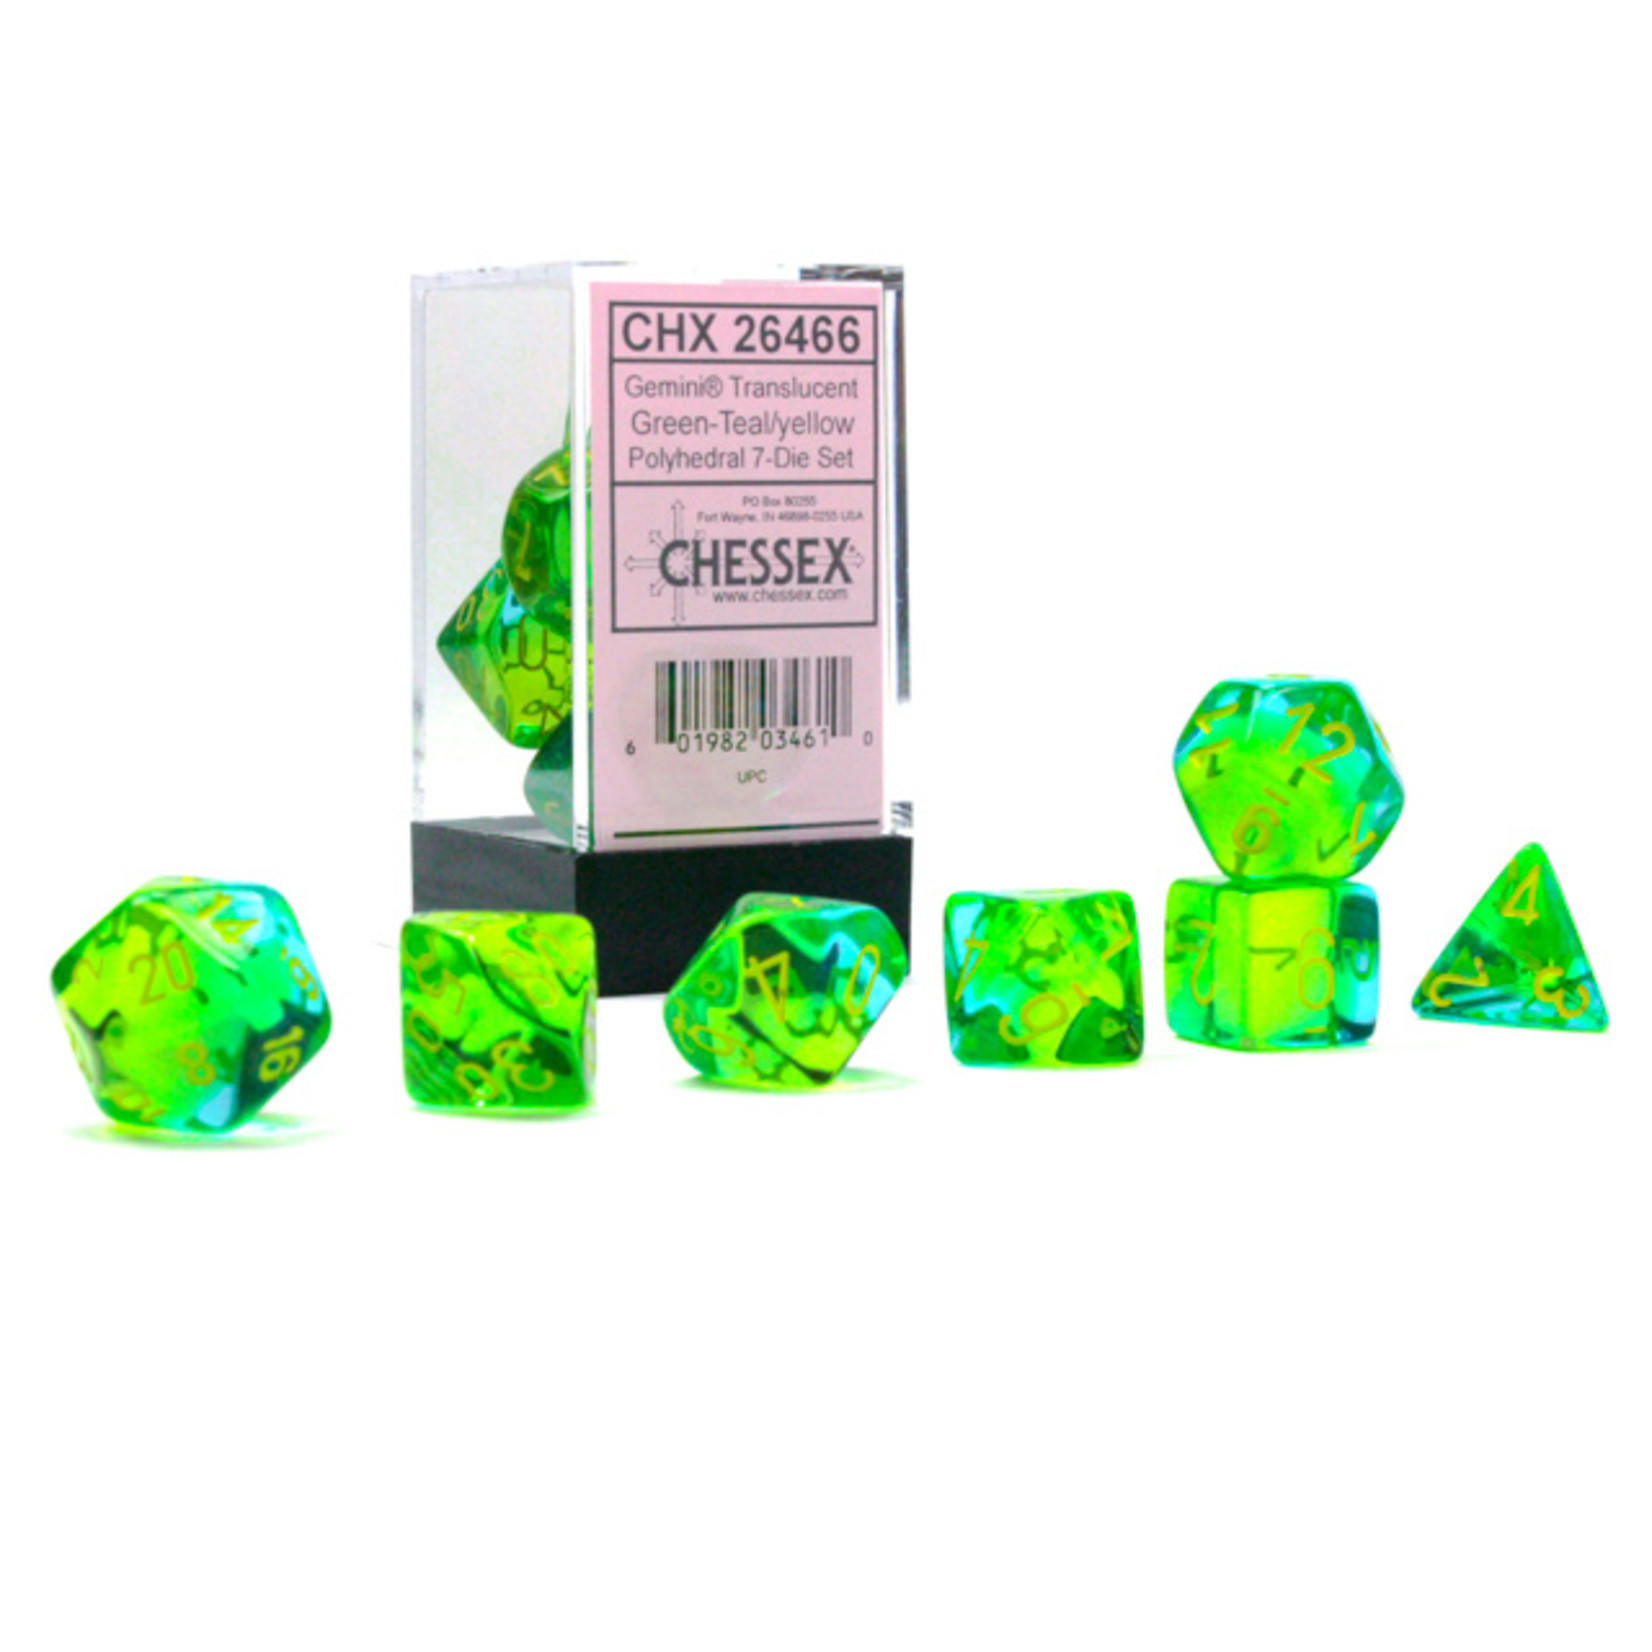 Chessex 26466 Gemini Translucent Teal and Green with Yellow 7-Set